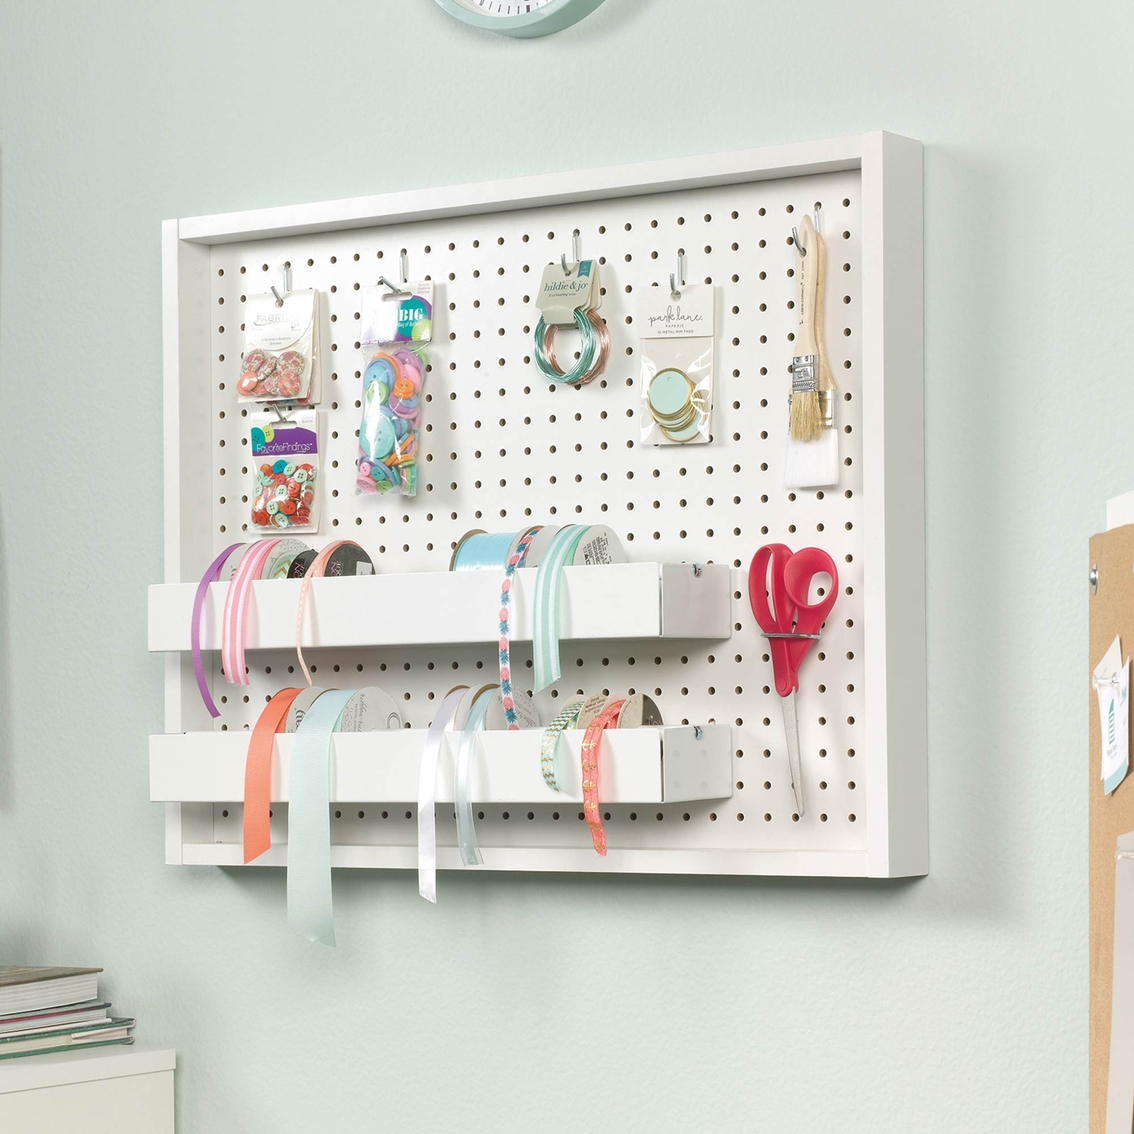 Sauder Wall Mounted Pegboard with Trays - Image 2 of 3